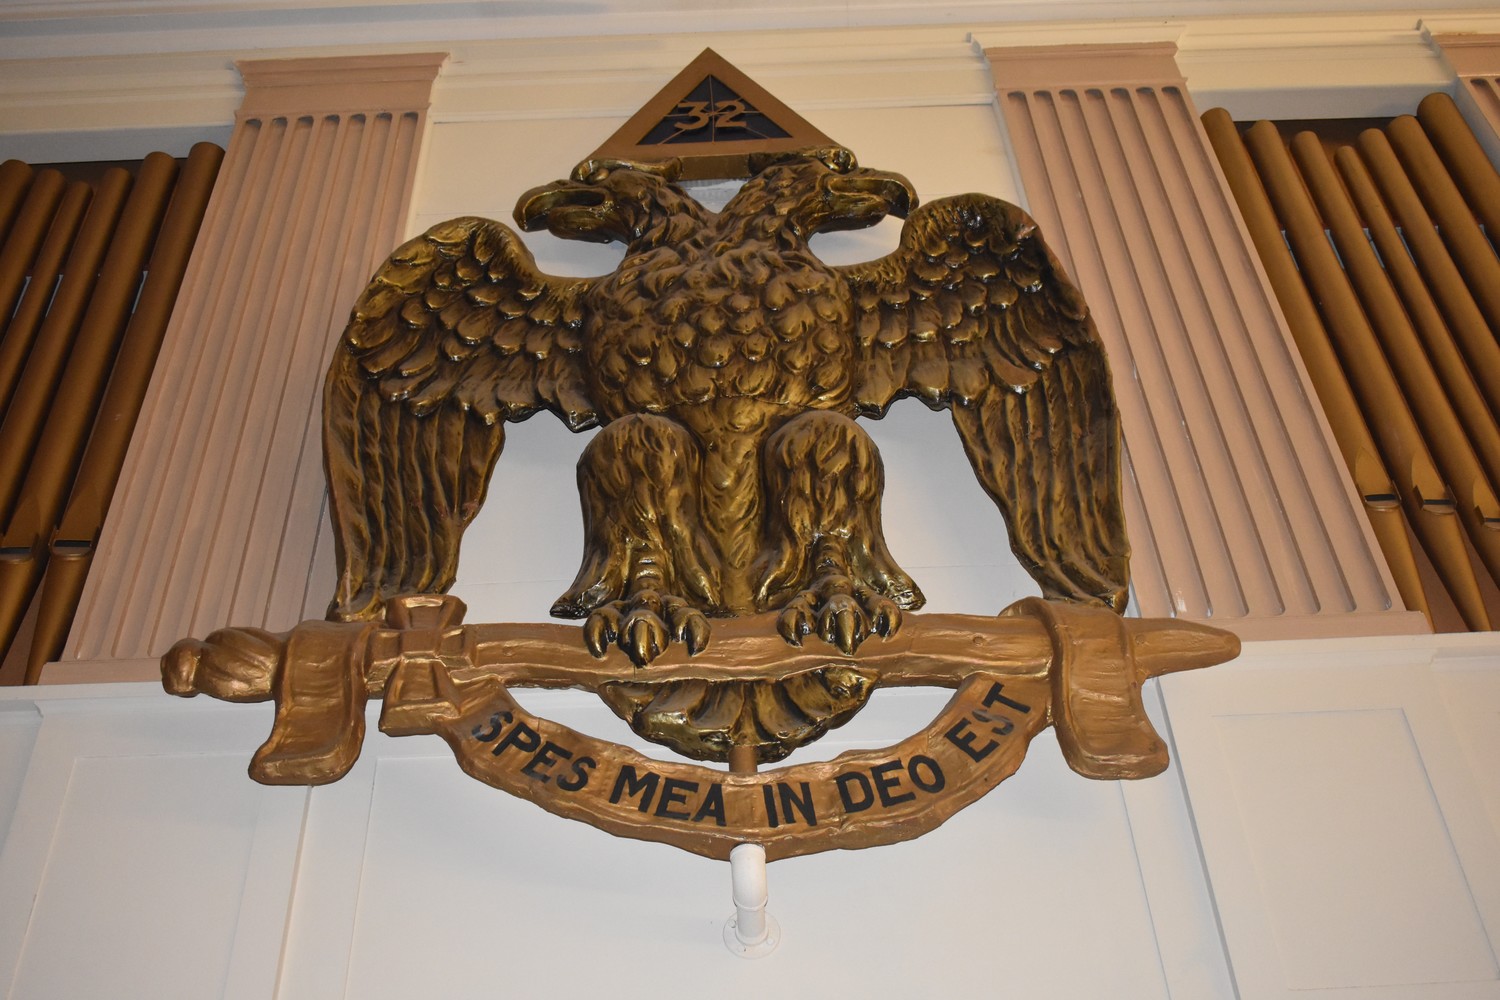 The double-headed Eagle of Lagash is used as an emblem by the Scottish Rite of Freemasonry.